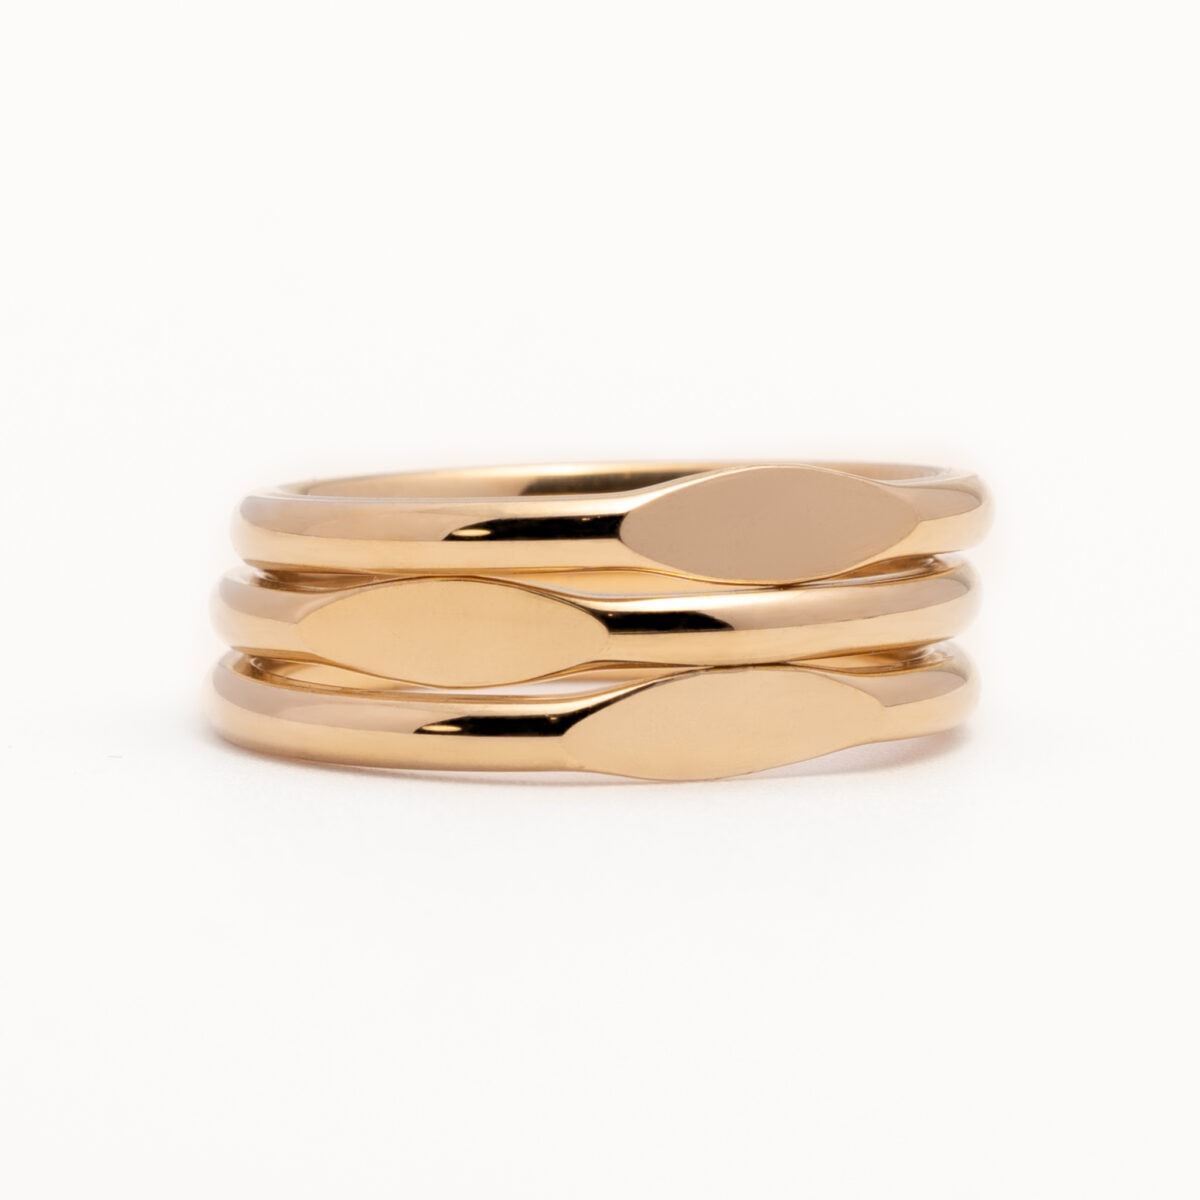 https://m.clubbella.co/product/tess-stamp-gold-ring/ Tess Stamp Gold Ring (3)